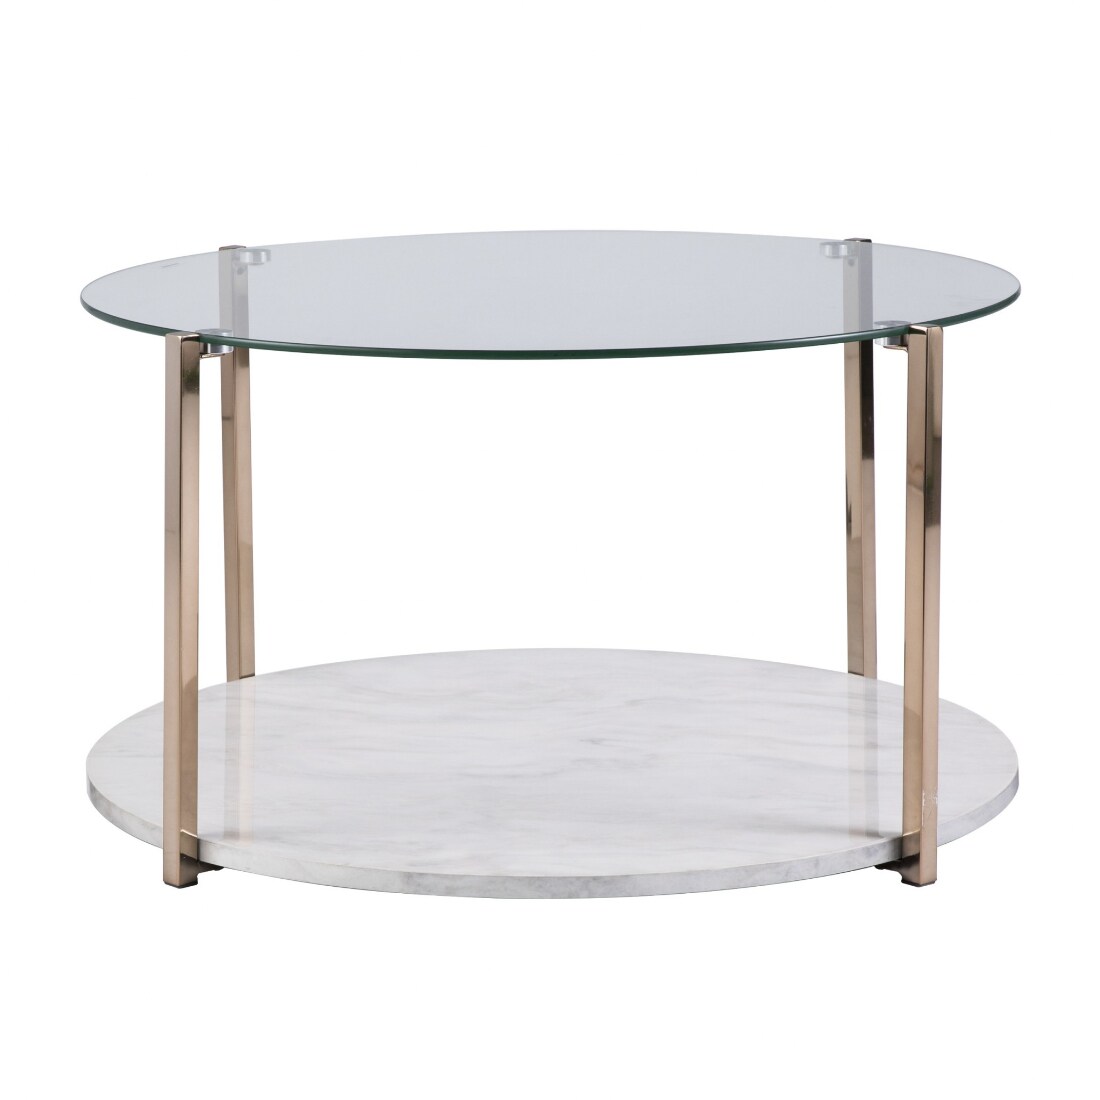 Modern Gold Metal Frame Glass Top Coffee Table with Faux Marble Bottom Shelf | - HomeRoots 4000402128